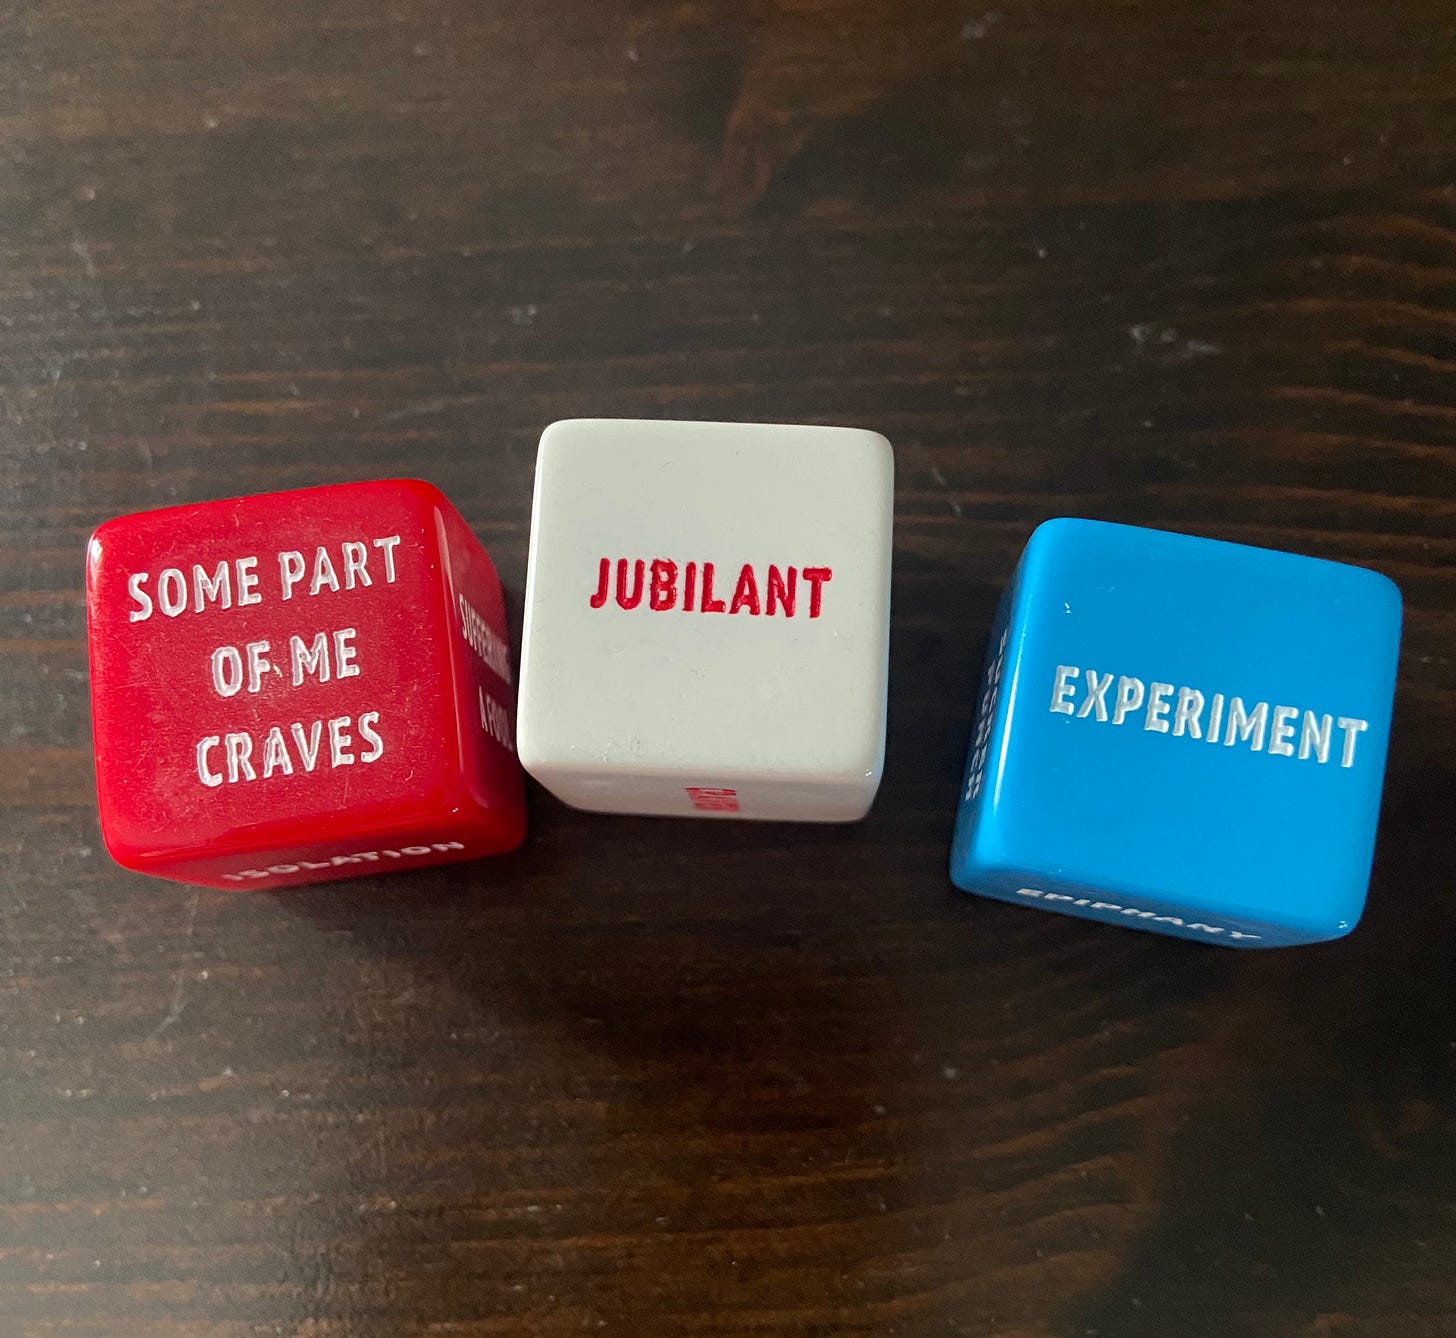 Picture of three dice, a red one that says: SOME PART OF ME CRAVES, a white one that says: JUBILANT, and a blue one that says: EXPERIMENT